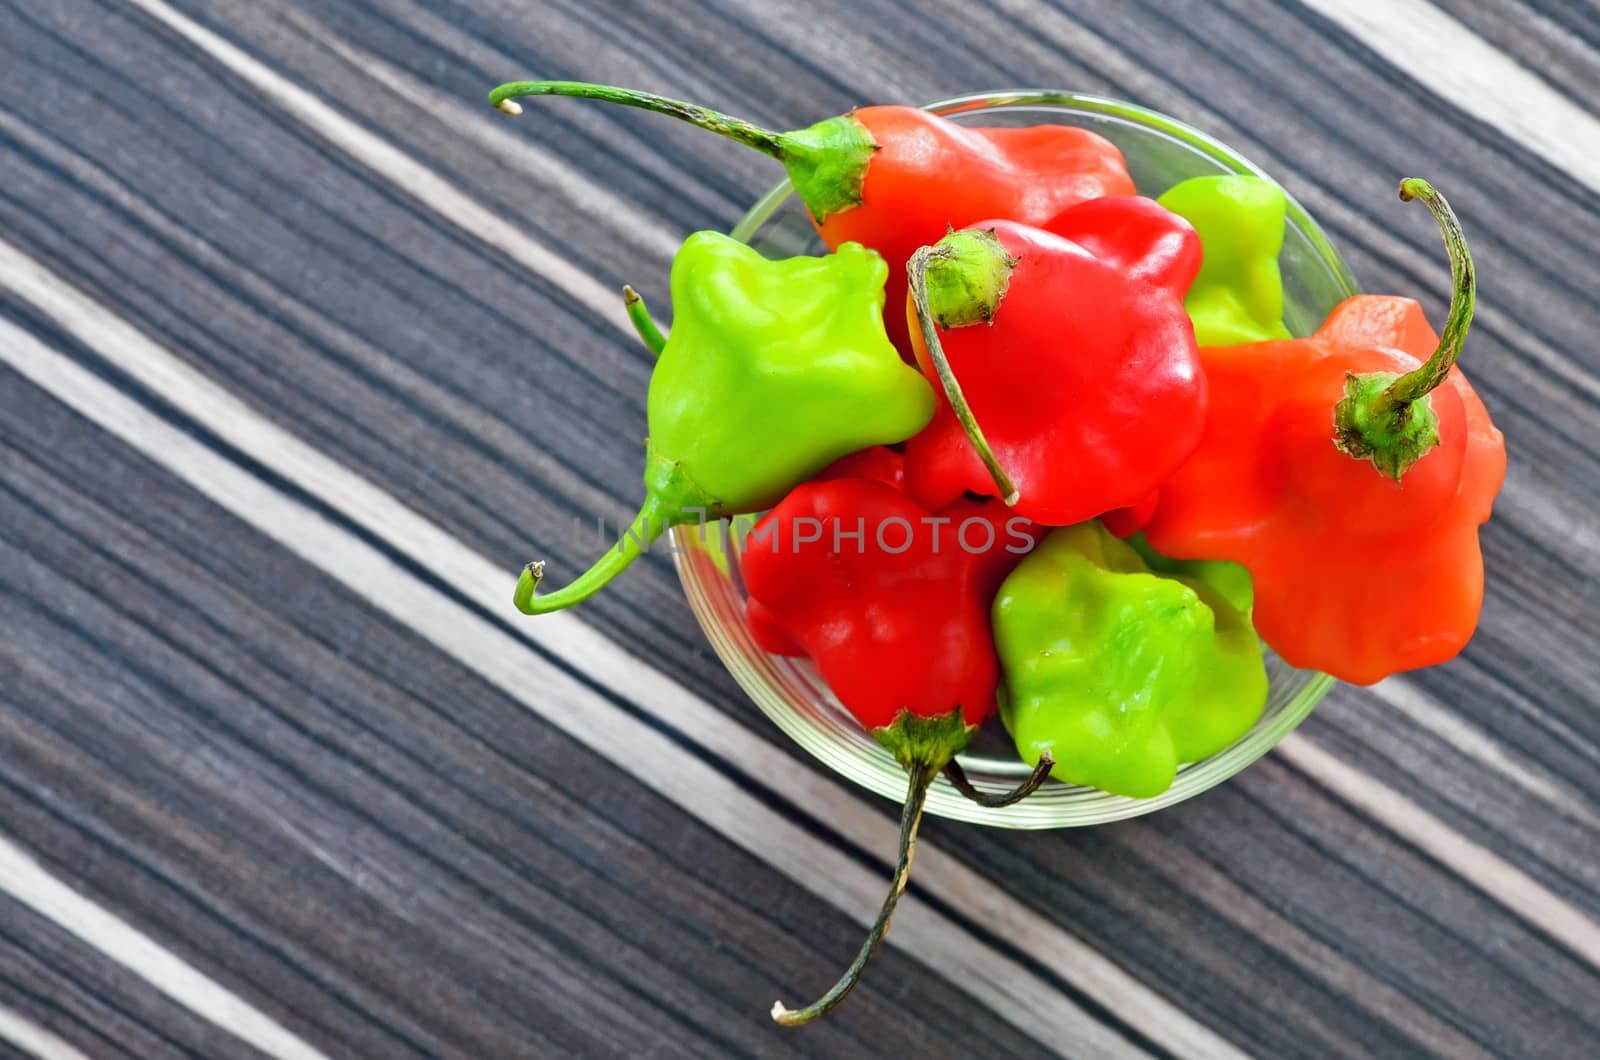 hot chili peppers by mady70